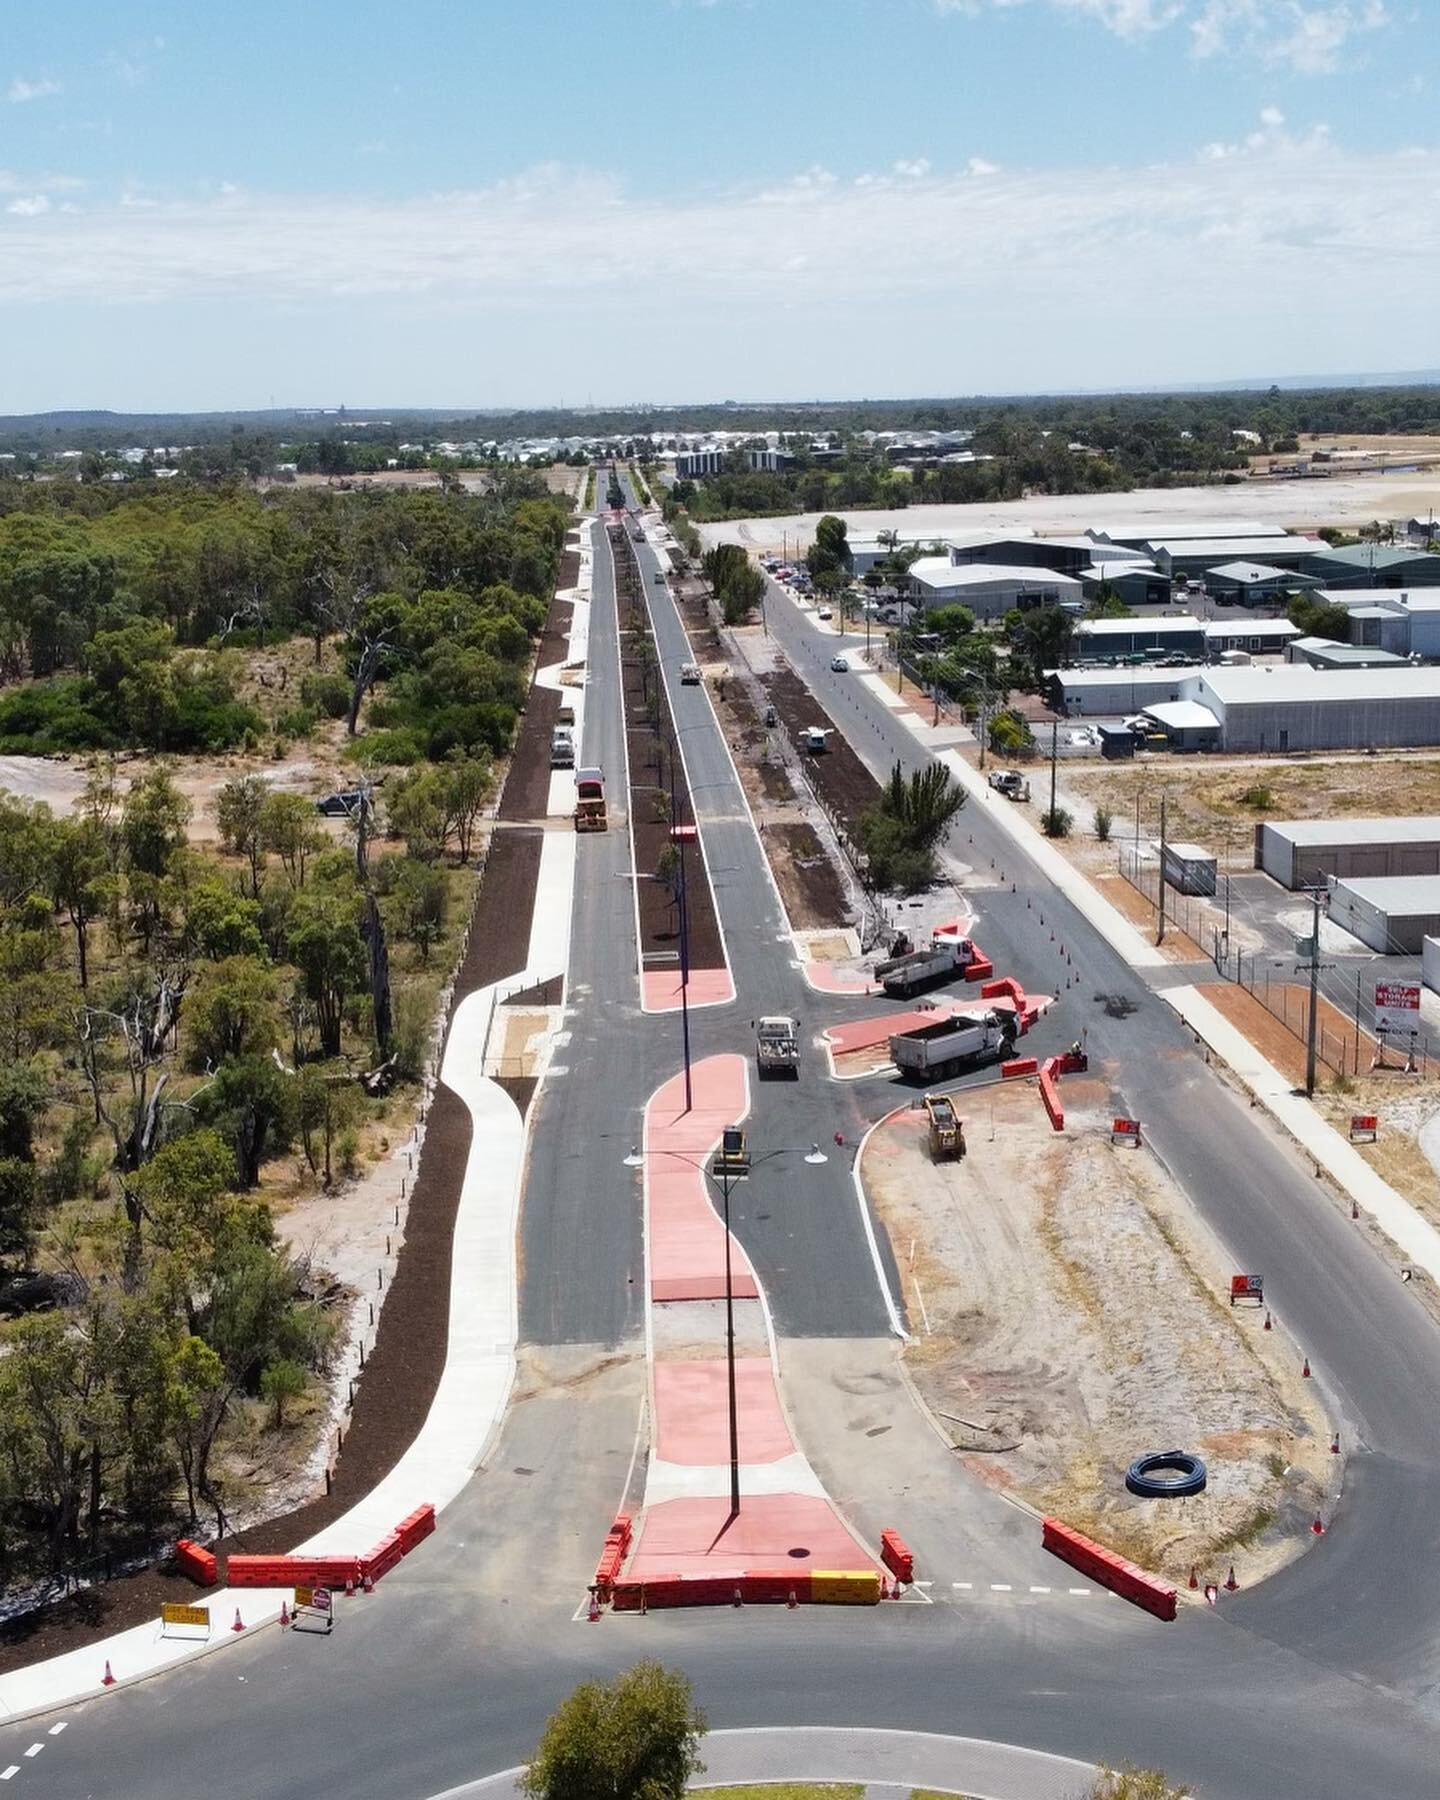 The new Promenade Extension is nearing completion, with the road expected to be opened for traffic on the 3rd of February. The new 700m extension included works of clearing, bulk earthworks, drainage, roadworks and landscaping.
&bull;
&bull;
&bull;
#